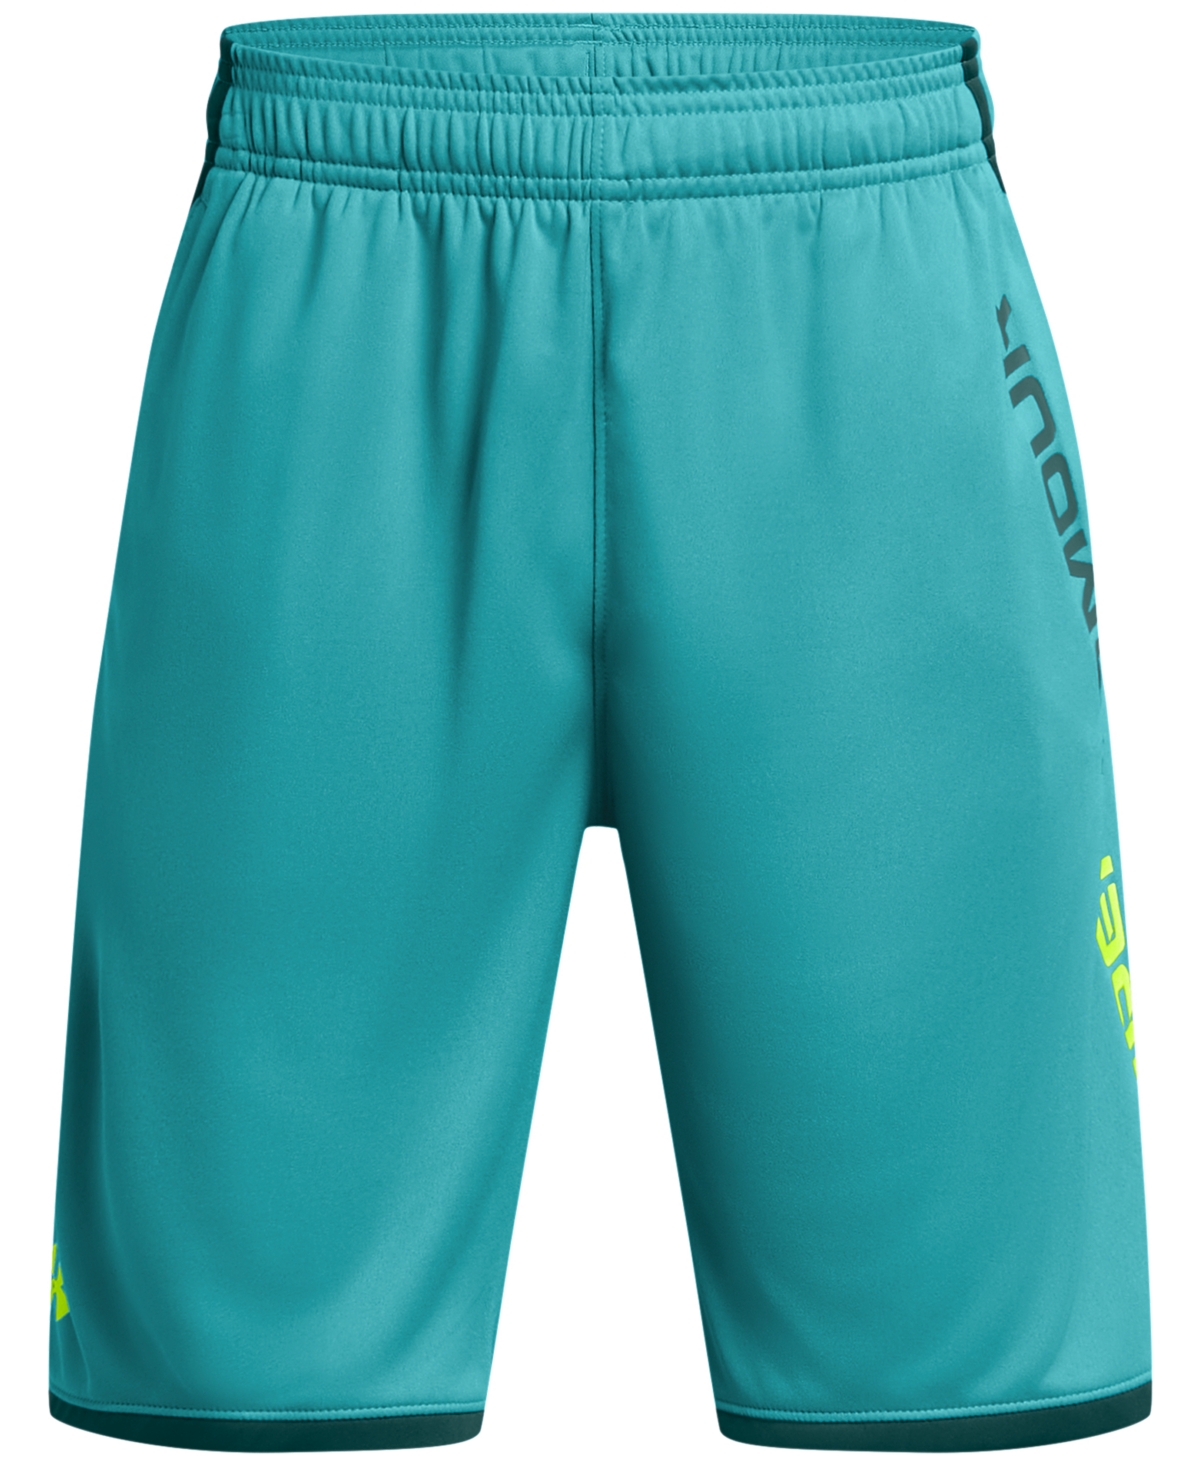 Under Armour Kids' Big Boys Stunt 3.0 Shorts In Circuit Teal,hydro Teal,high-vis Yel